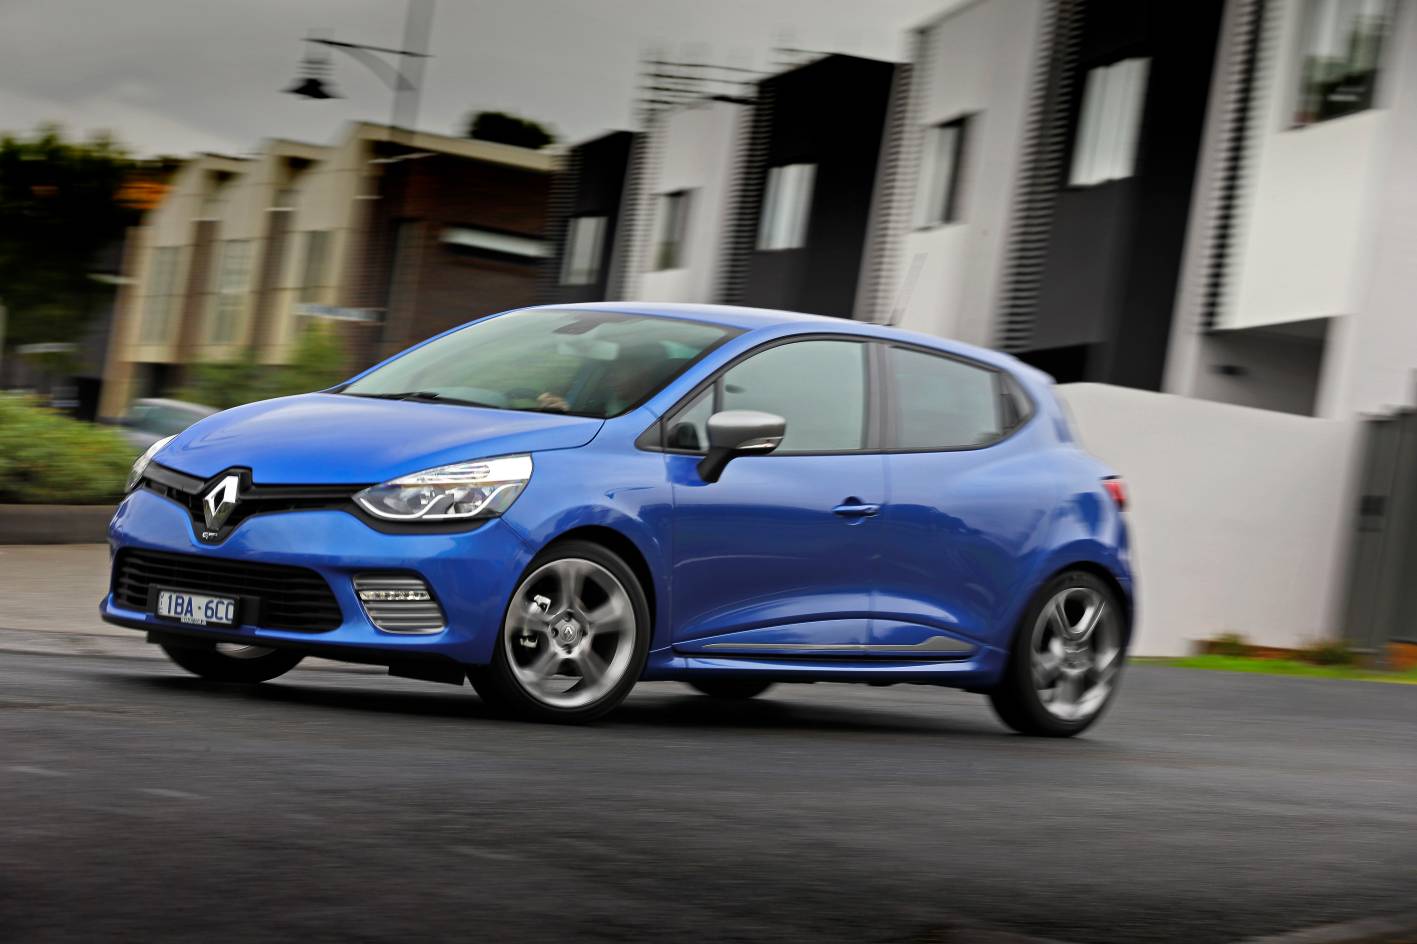 Renault Clio GT now on sale from $25,290